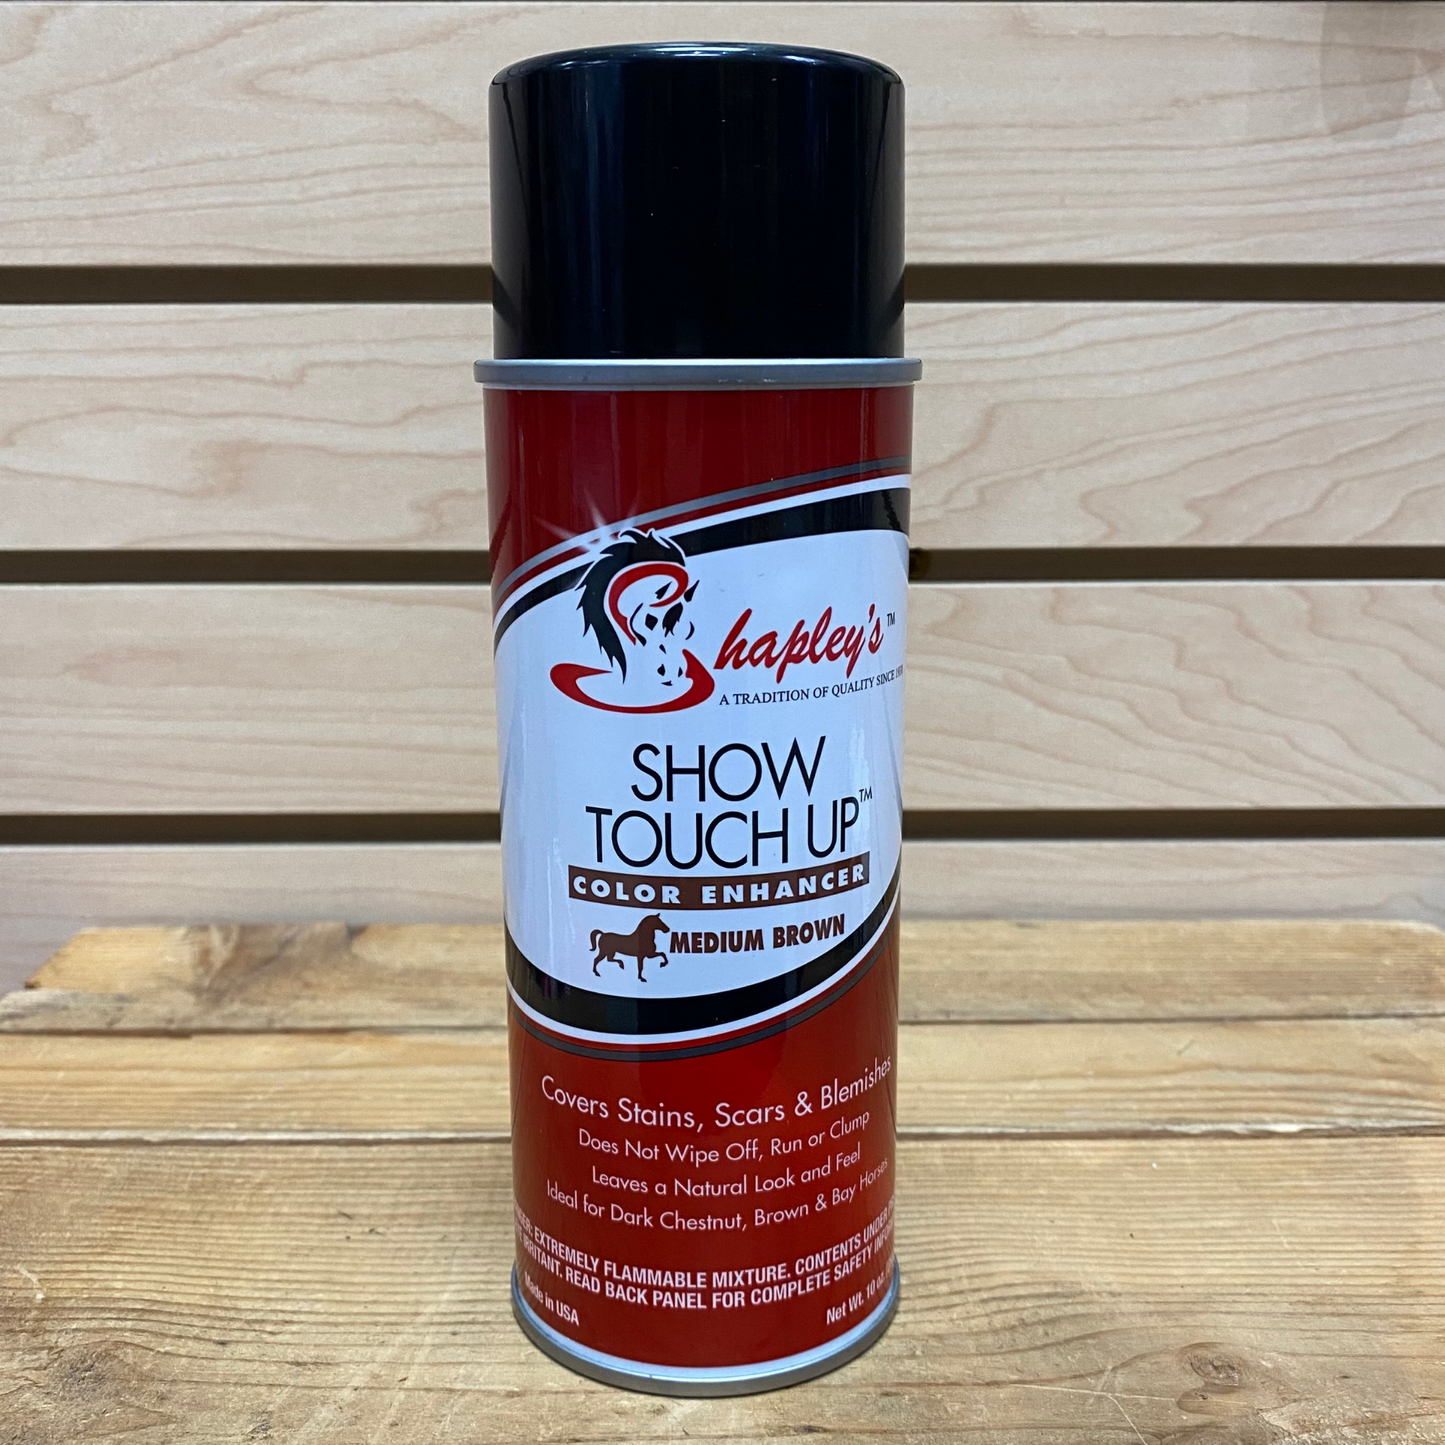 Shapley's Show Touch Up Spray